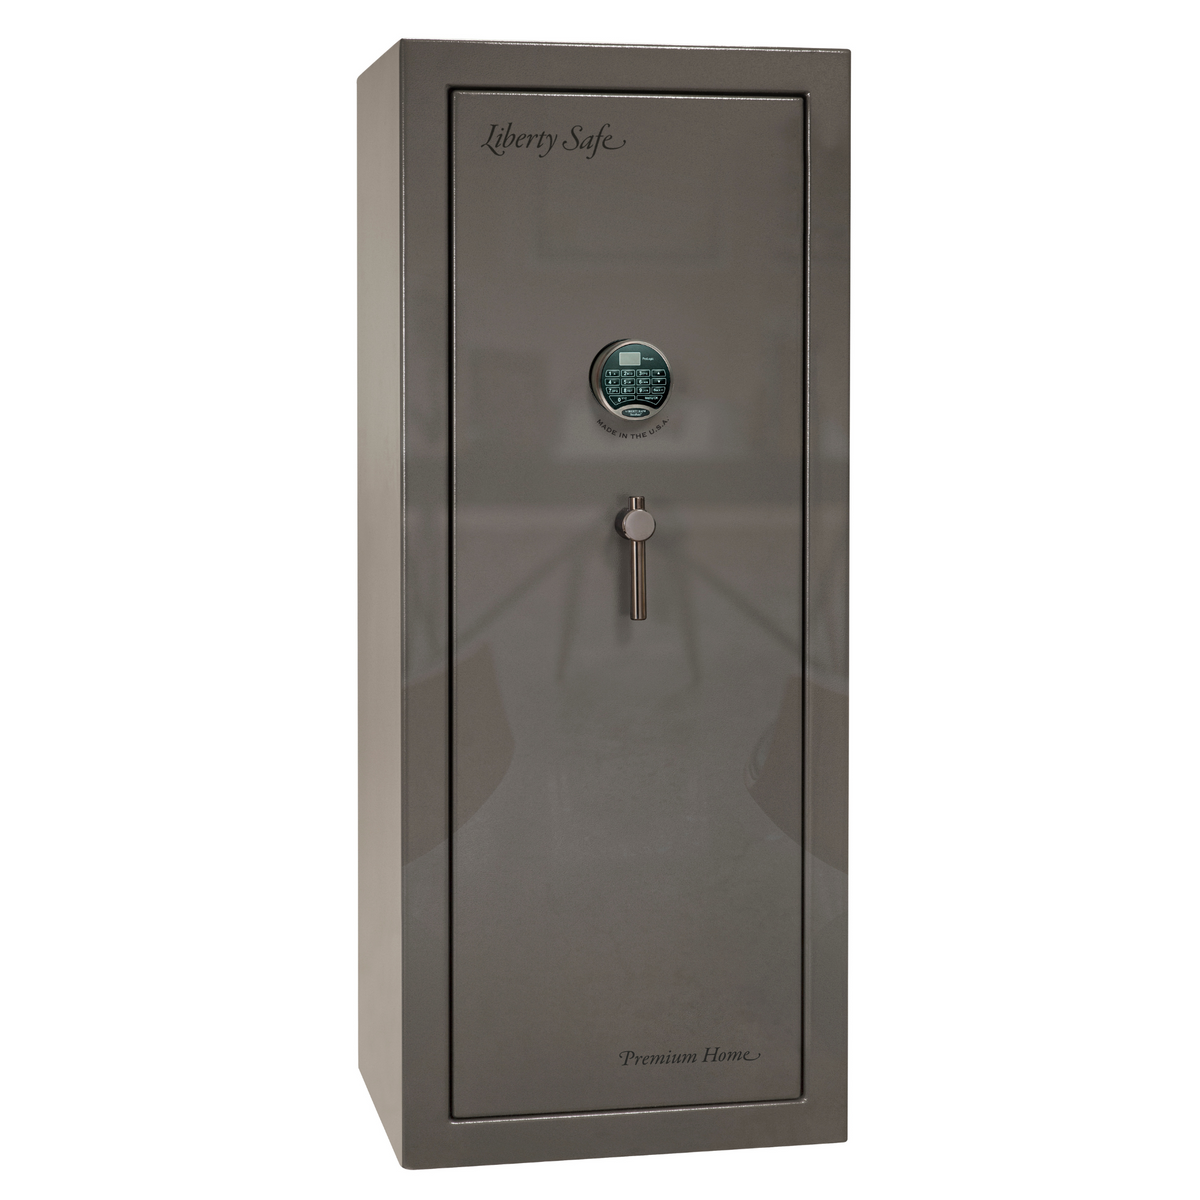 Premium Home Series | Level 7 Security | 2 Hour Fire Protection | 17 | Dimensions: 59.25&quot;(H) x 24&quot;(W) x 20.25&quot;(D) | Gray Gloss - Closed Door